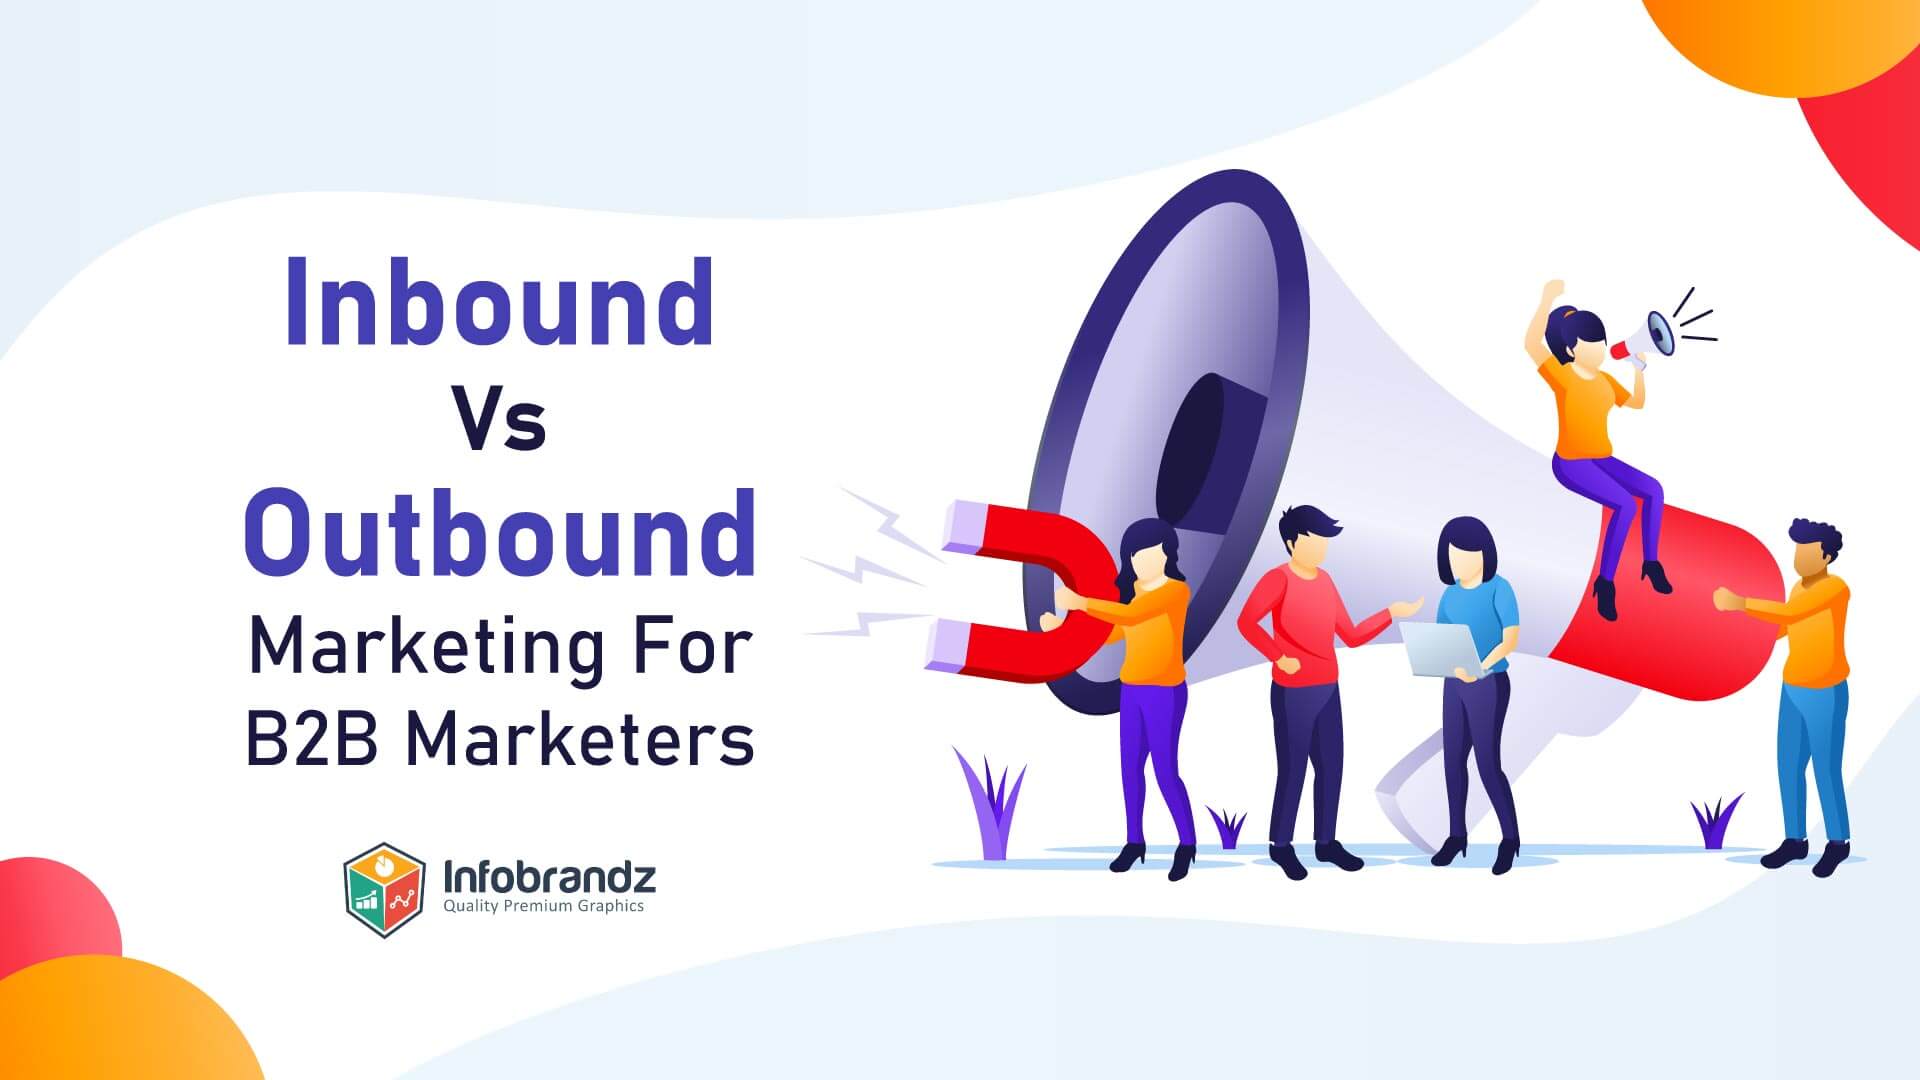 Inbound Vs. Outbound Marketing For B2B Marketers